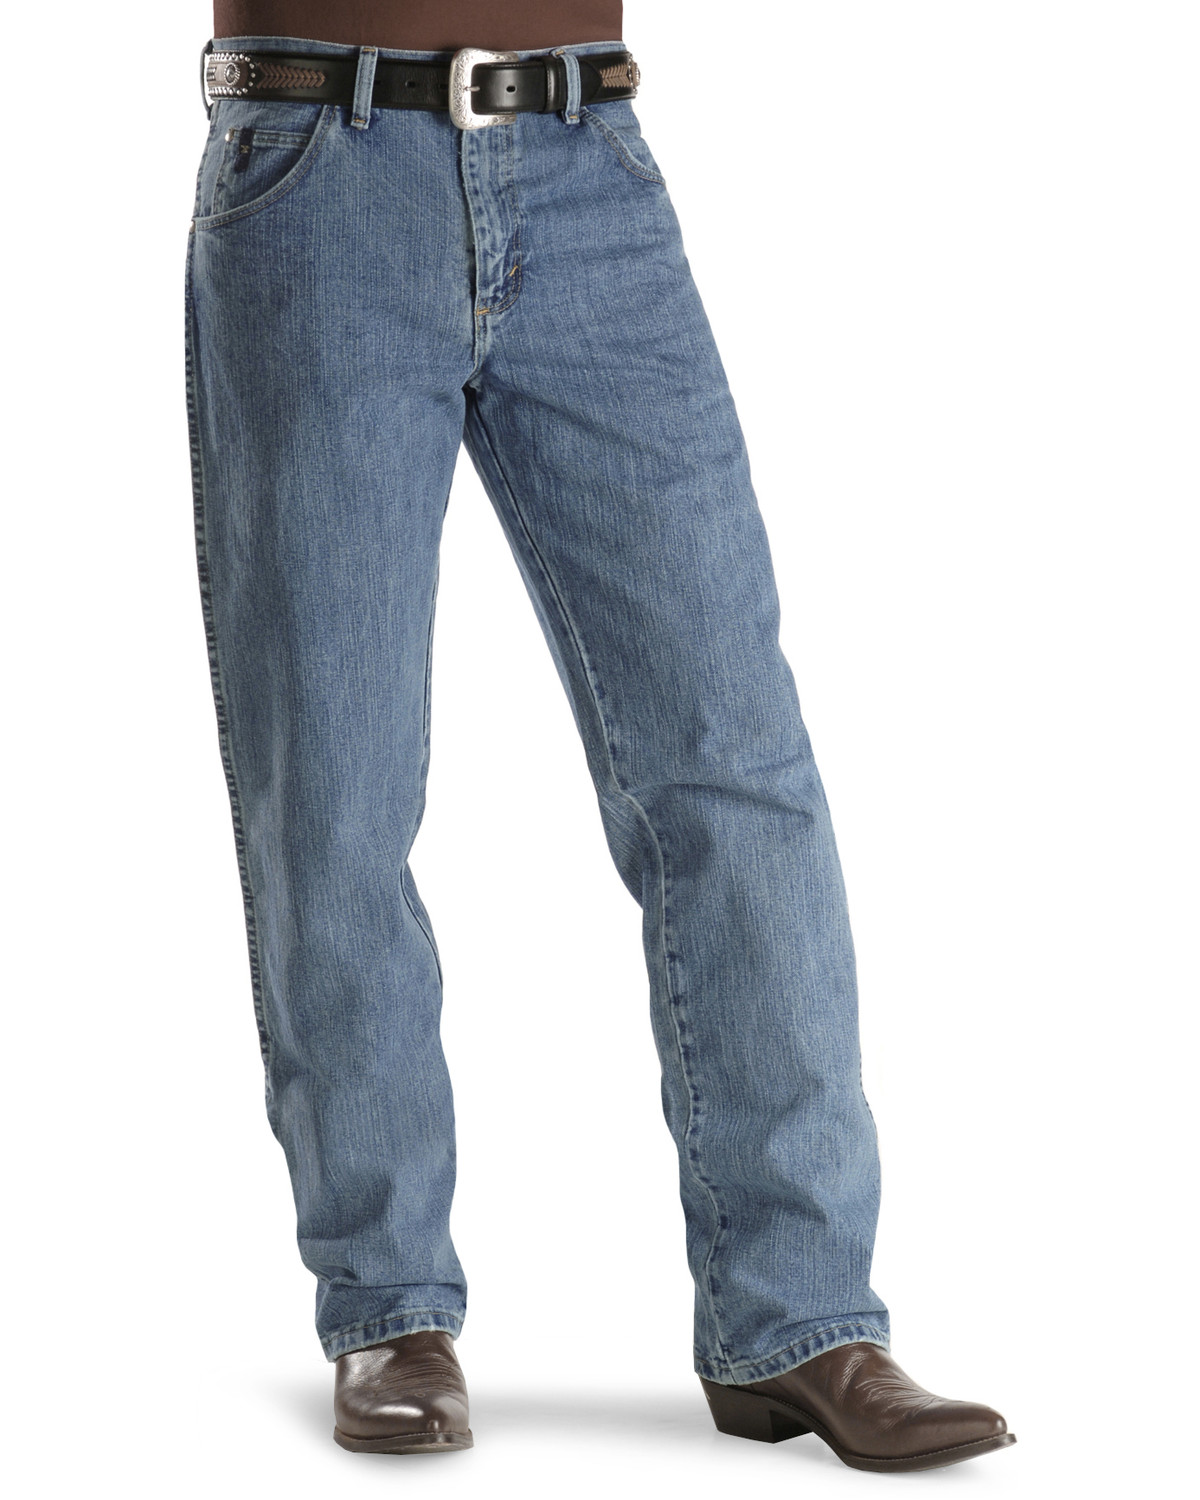 Wrangler 20X Jeans - No. 23 Relaxed Fit | Sheplers